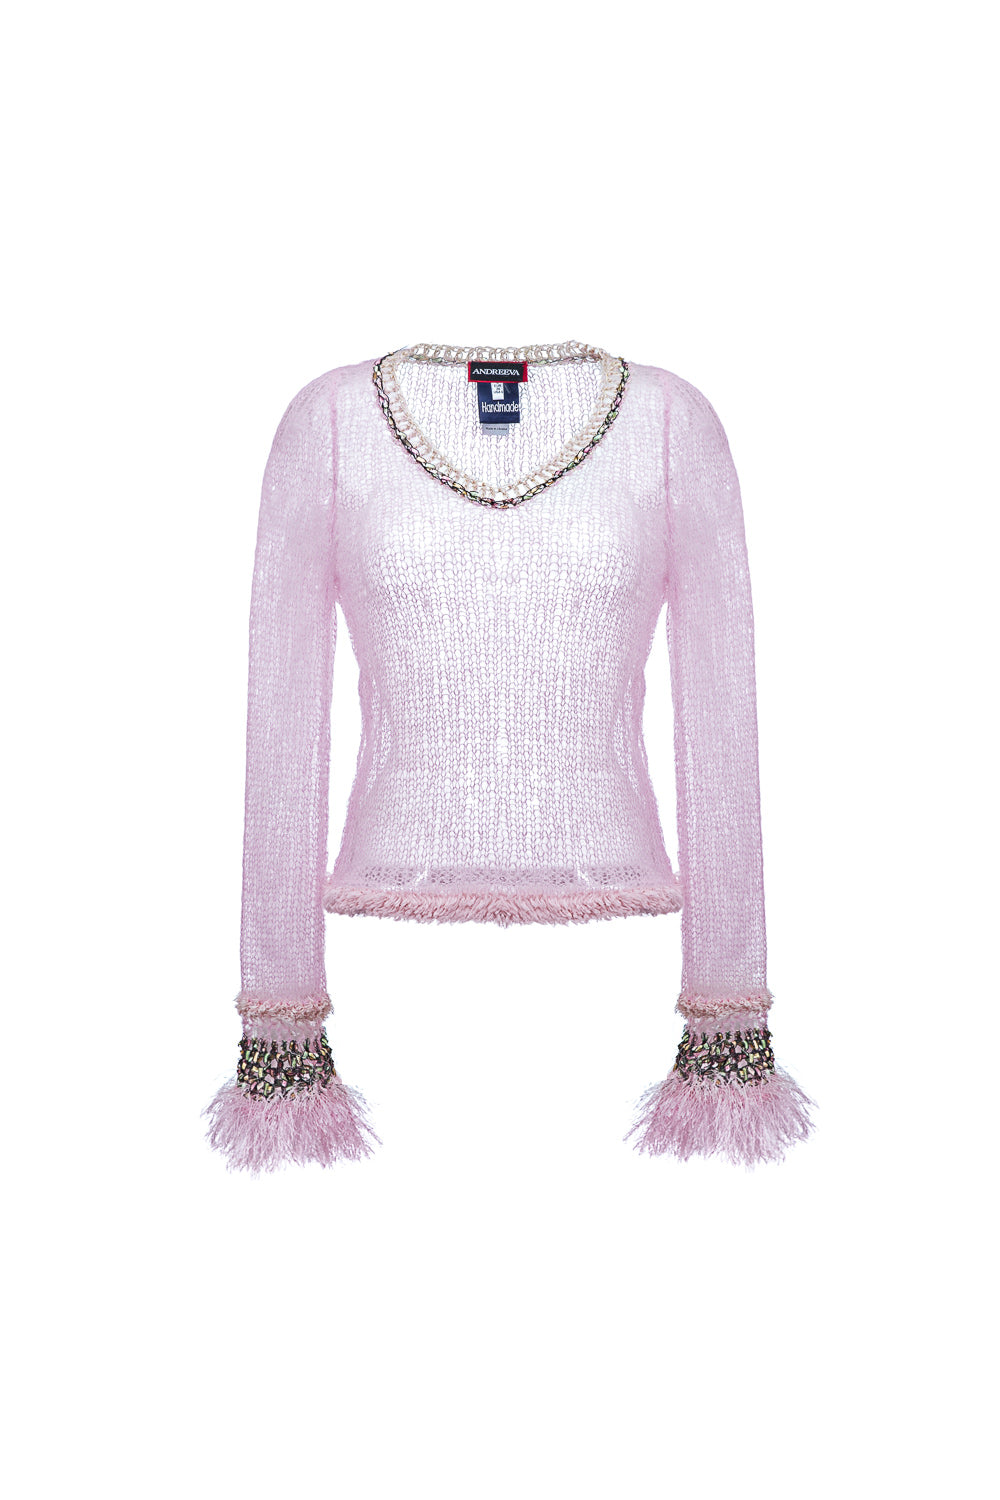 Andreeva Women's Rose Gold Light Baby Pink Handmade Knit Top In Blue